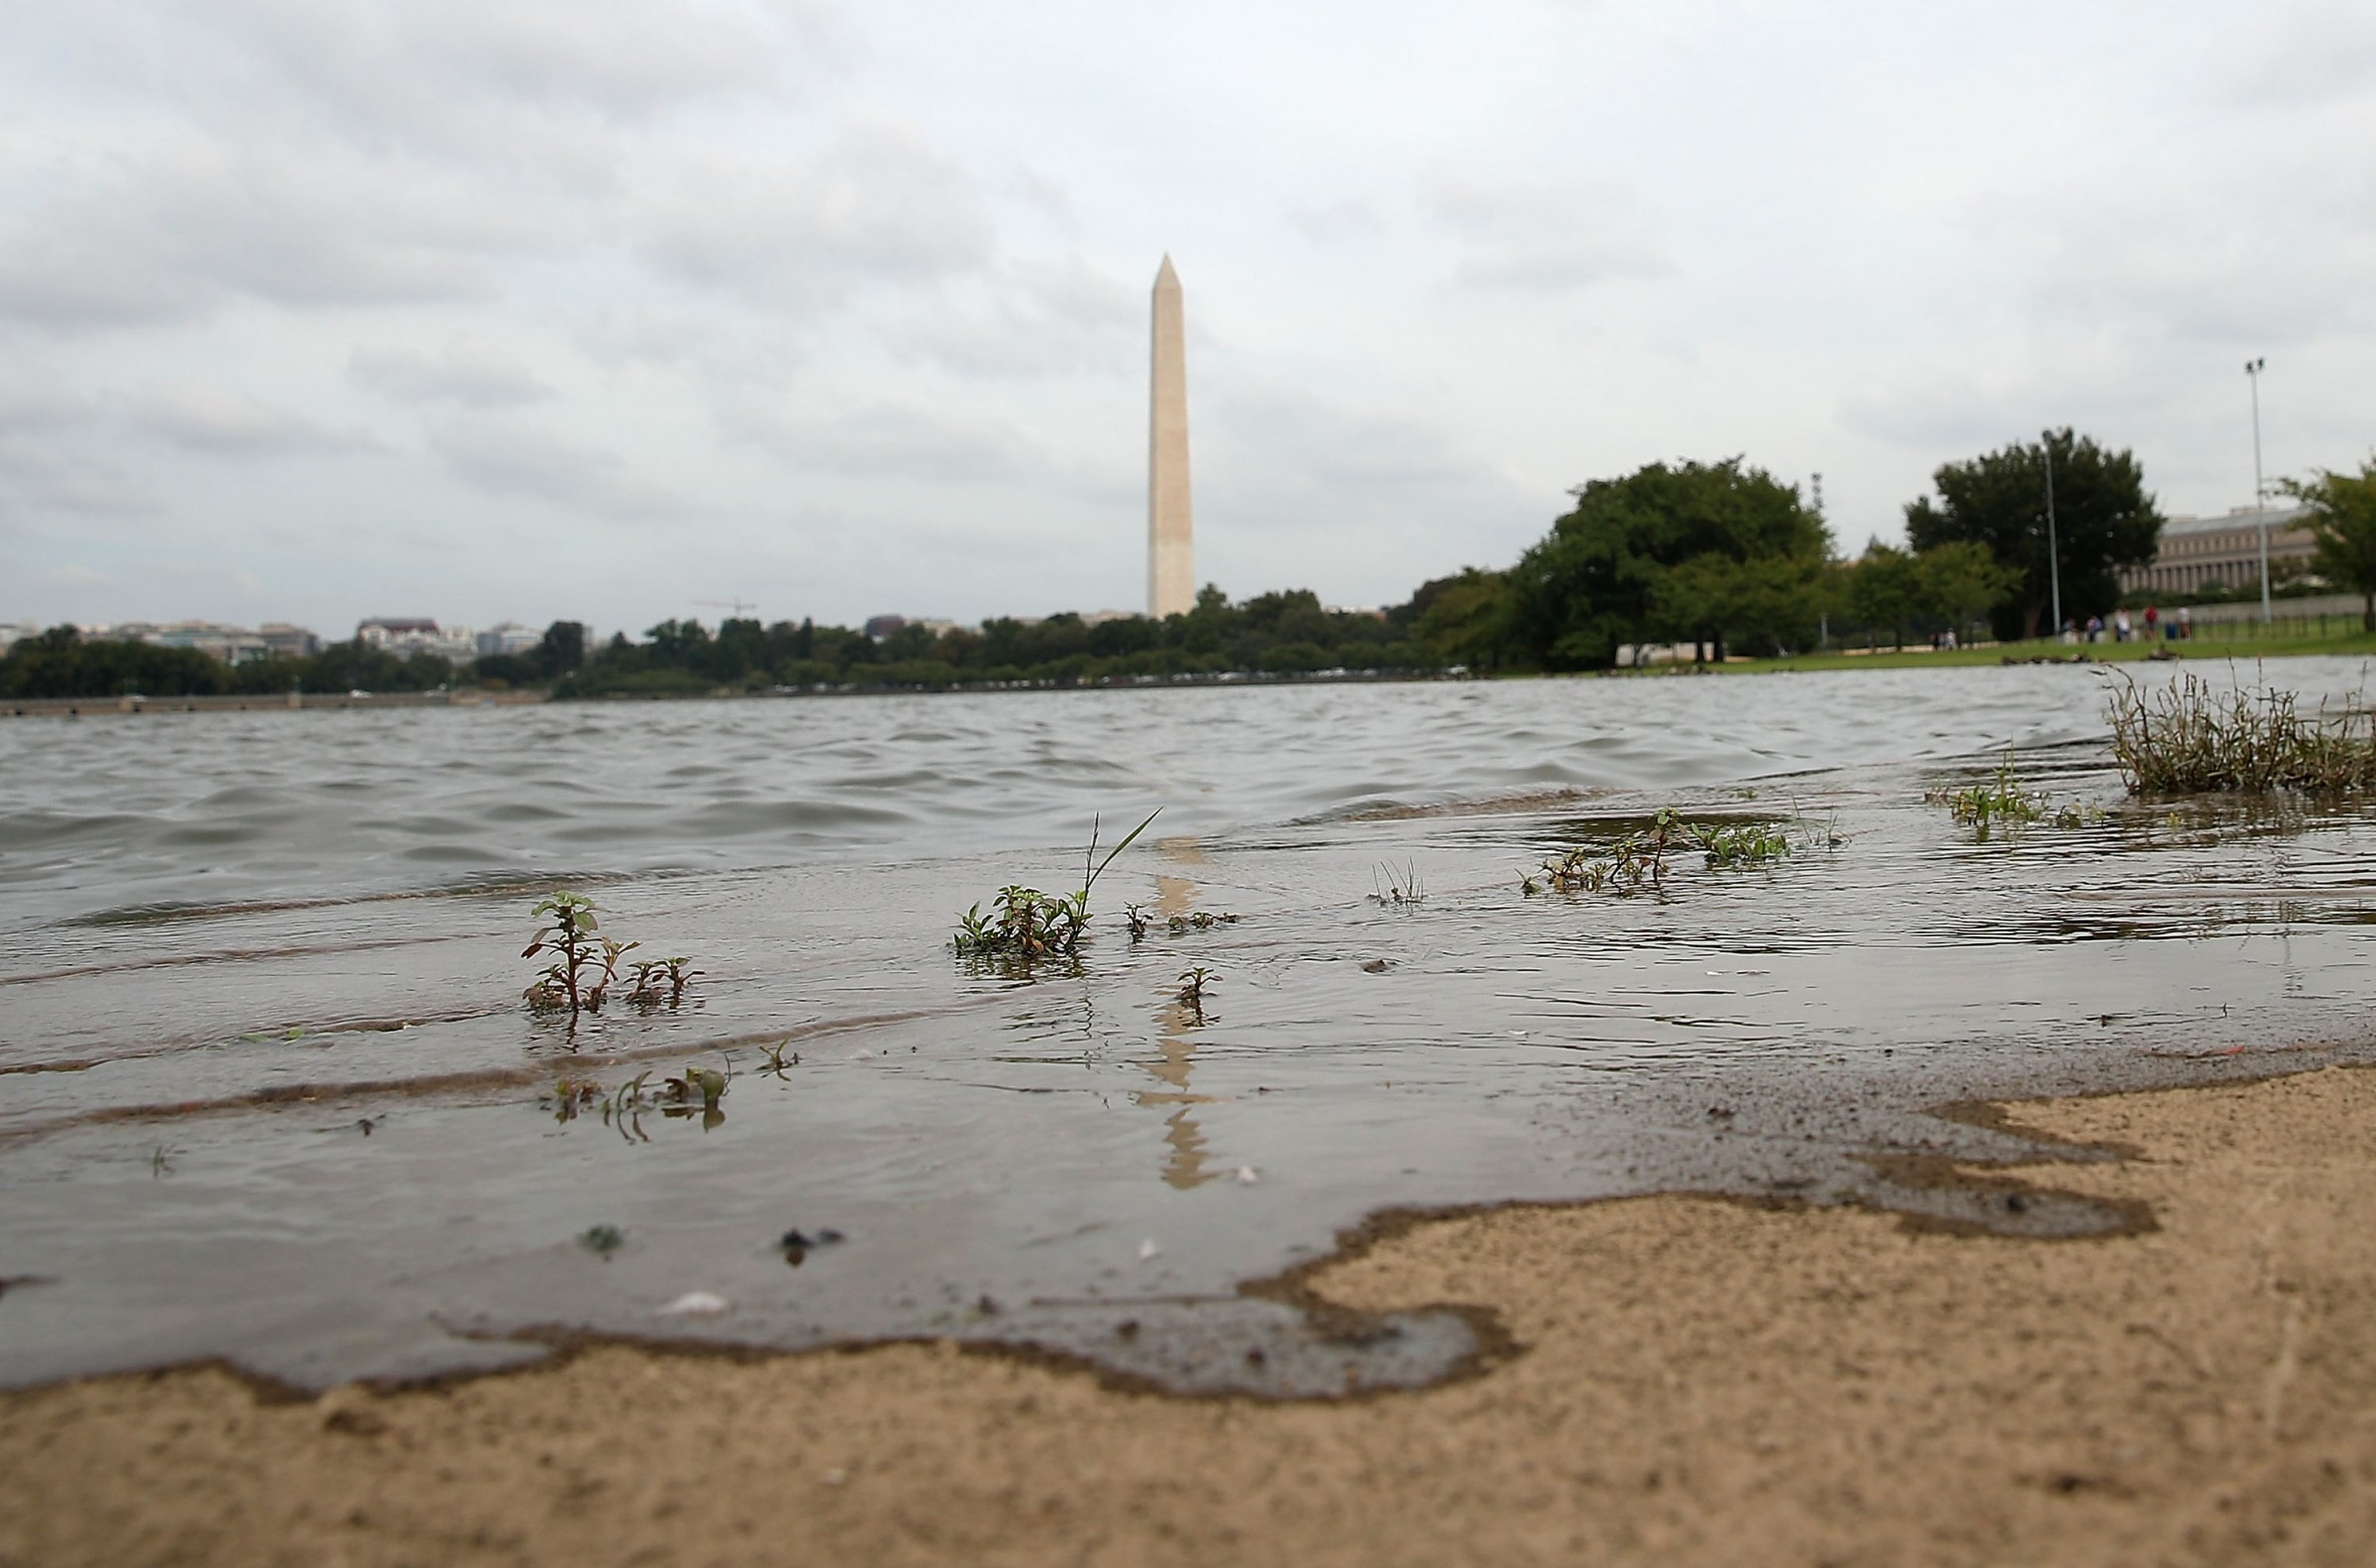 Nuisance flooding is already an issue in Washington, DC as sea levels continue to rise in part due to climate change. President Trump will give his State of the Union address tonight, but likely won’t mention climate at all.